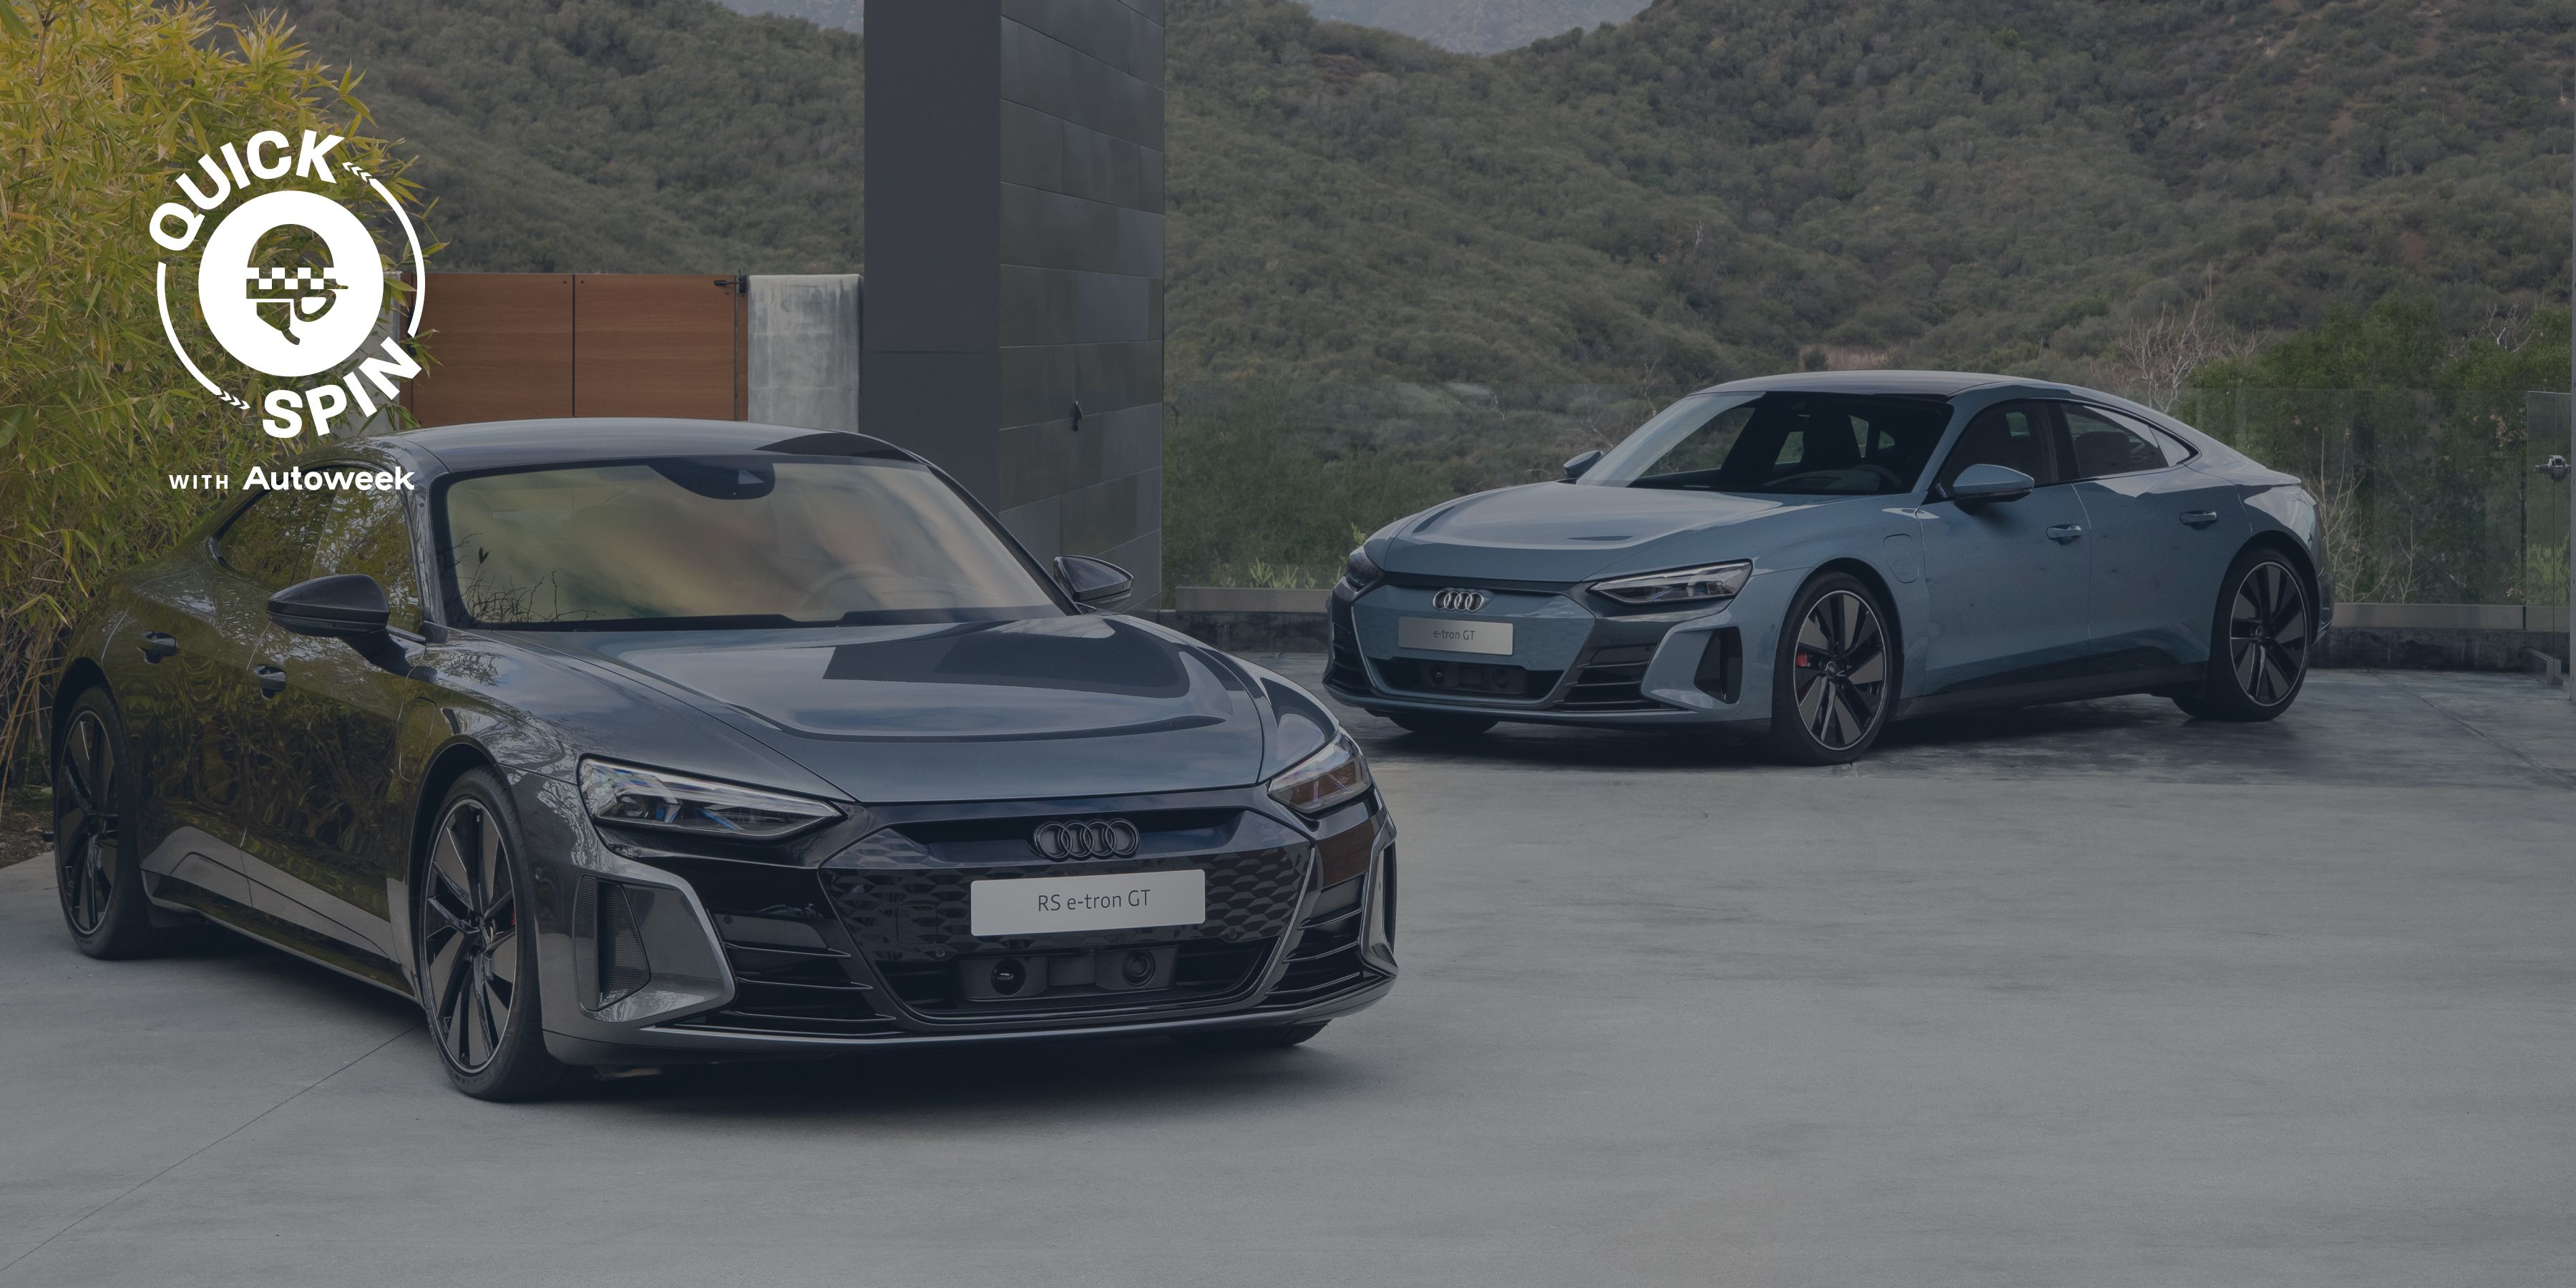 2022 Audi e-tron GT Review: Electric Grand Touring Done Right